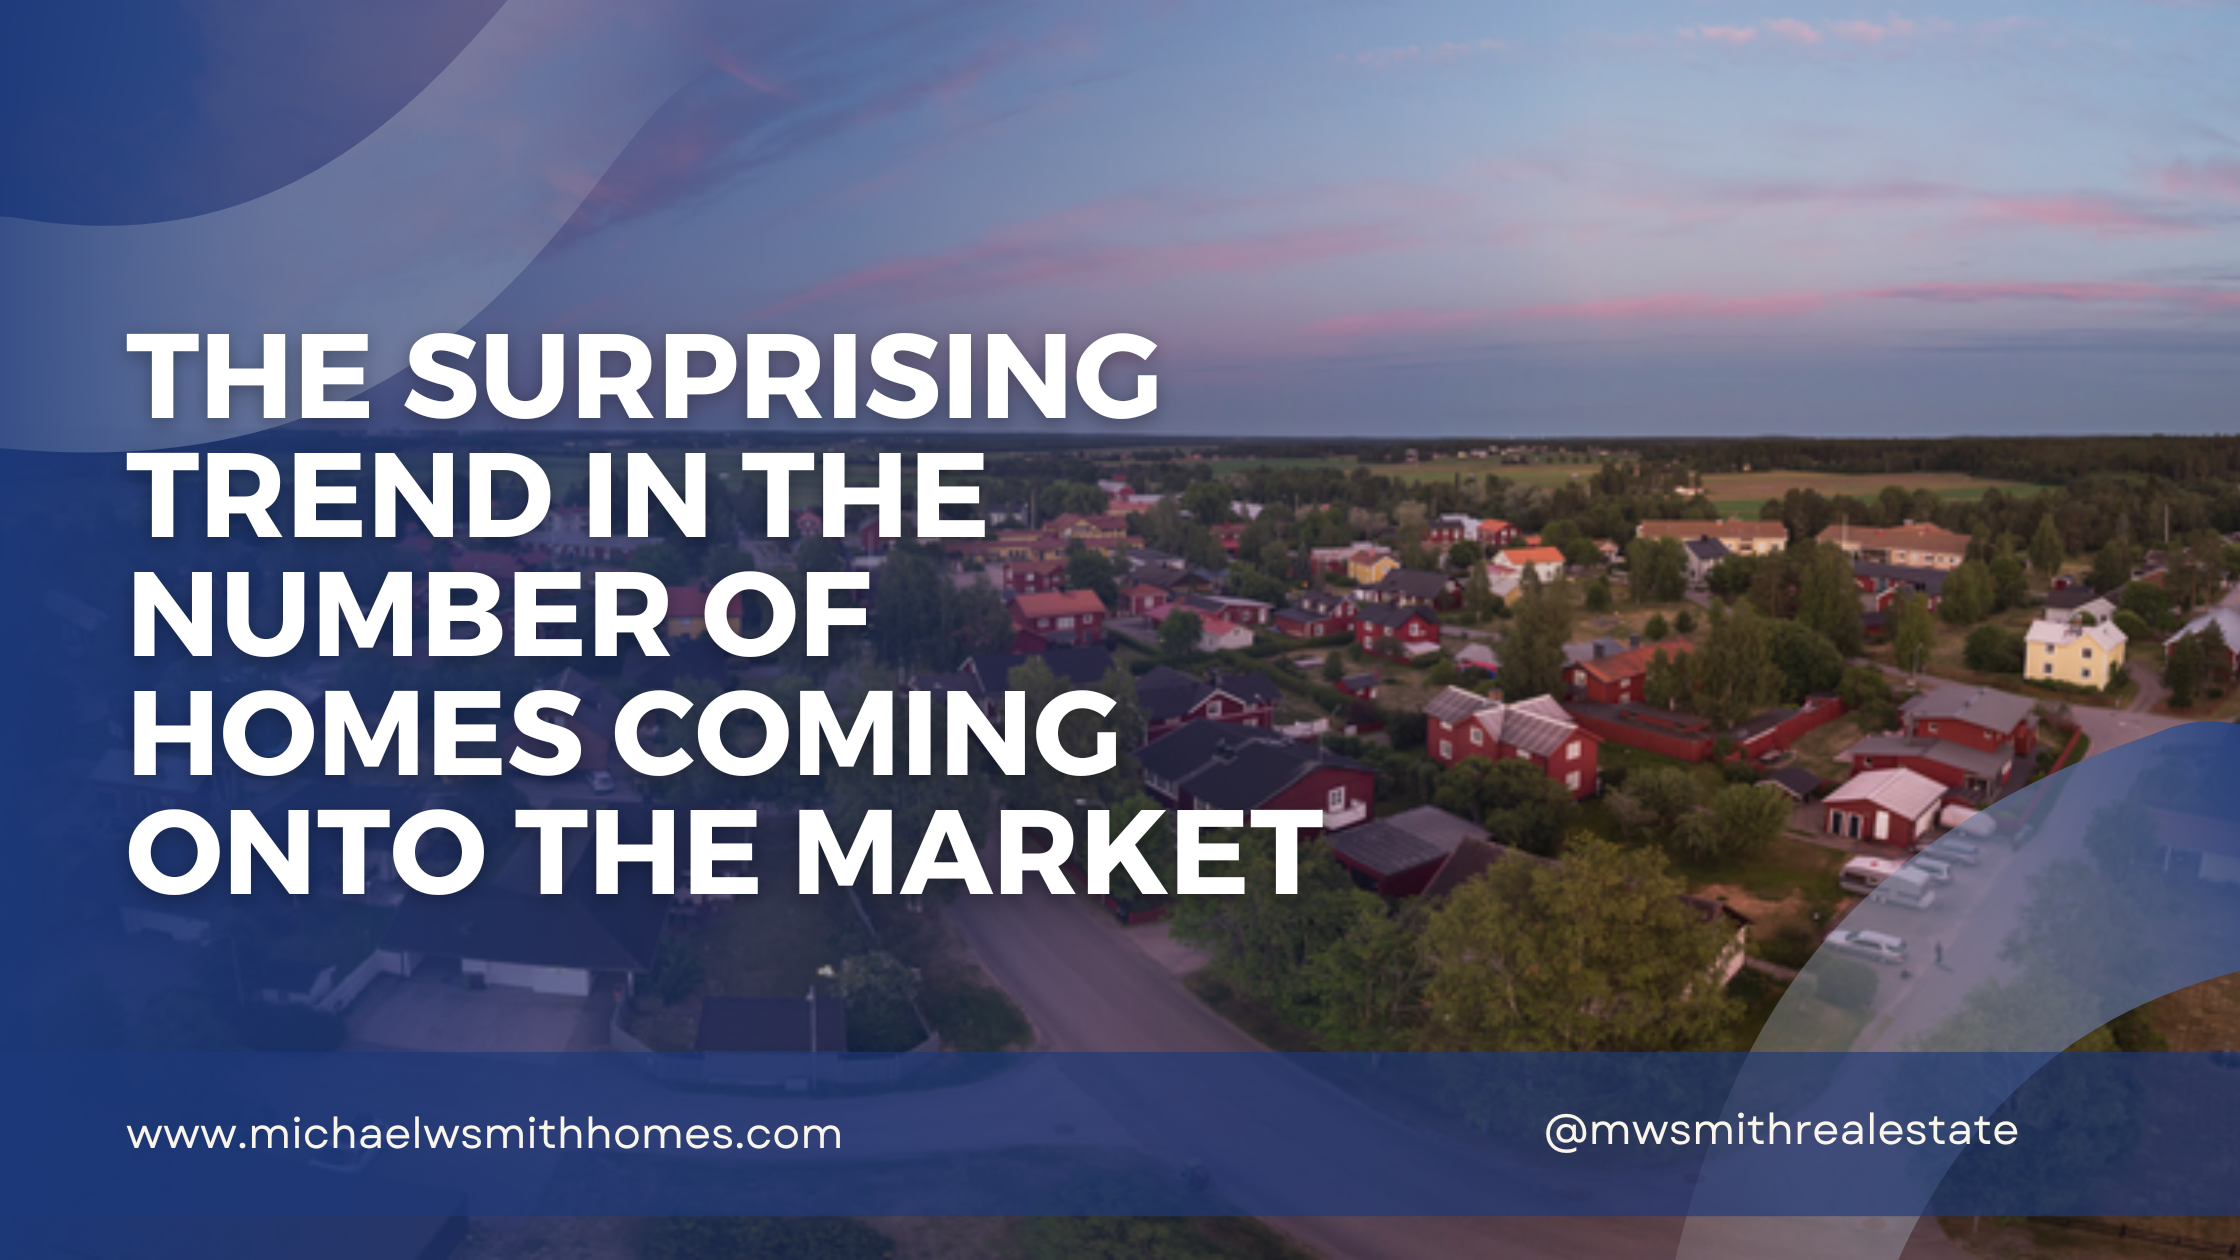 The Surprising Trend in the Number of Homes Coming onto the Market